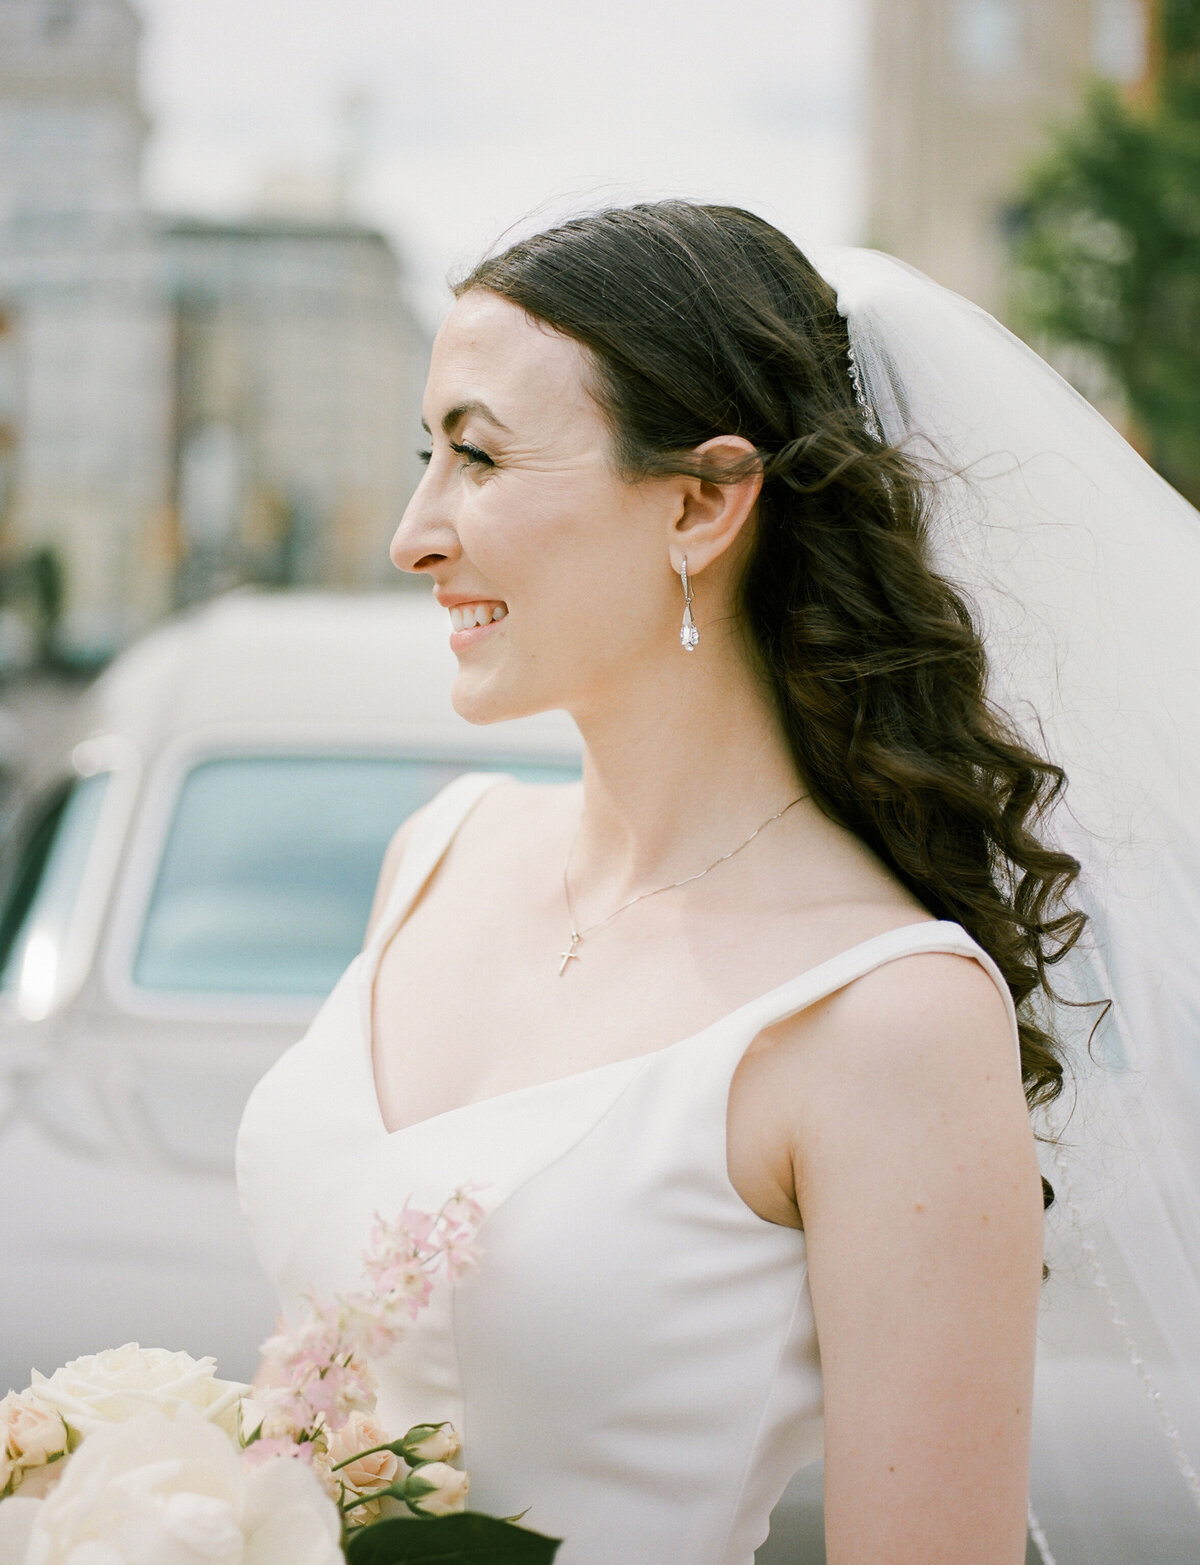 A bride holding her pink and white flowers smiles at her groom in front of a vintage car with the wind blowing her hair and veil gently. Natural makeup by D Neiswender Artistry